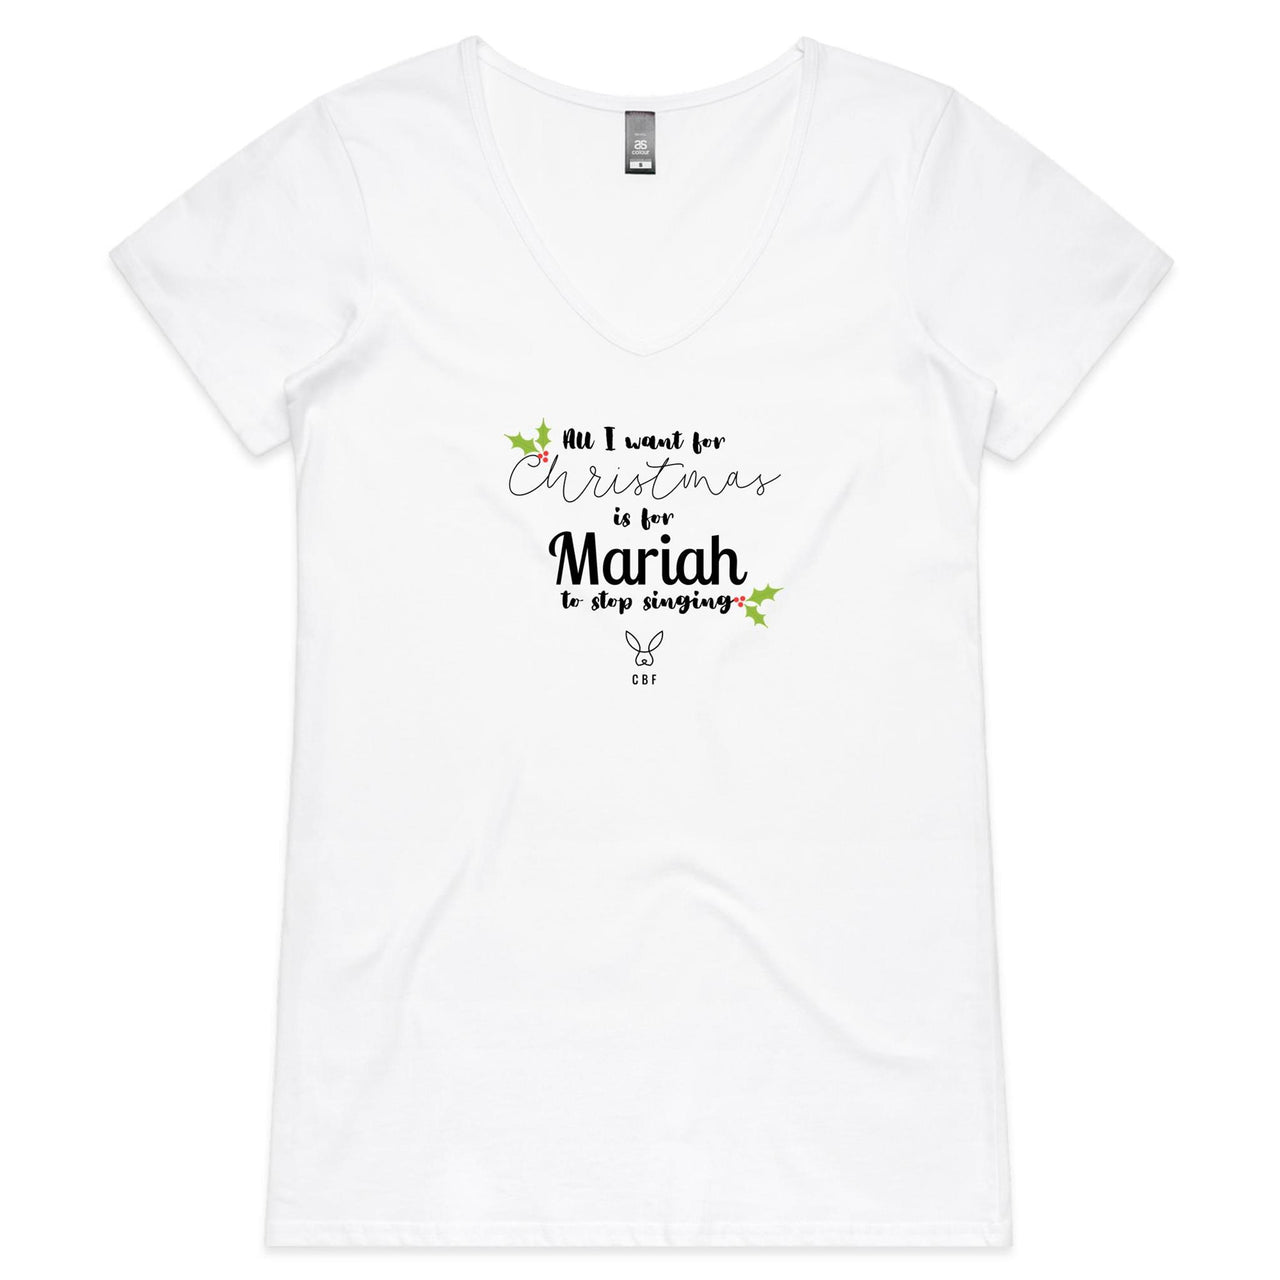 CBF "All I Want for Christmas is for Mariah to Stop Singing" Womens V-Neck T-Shirt white